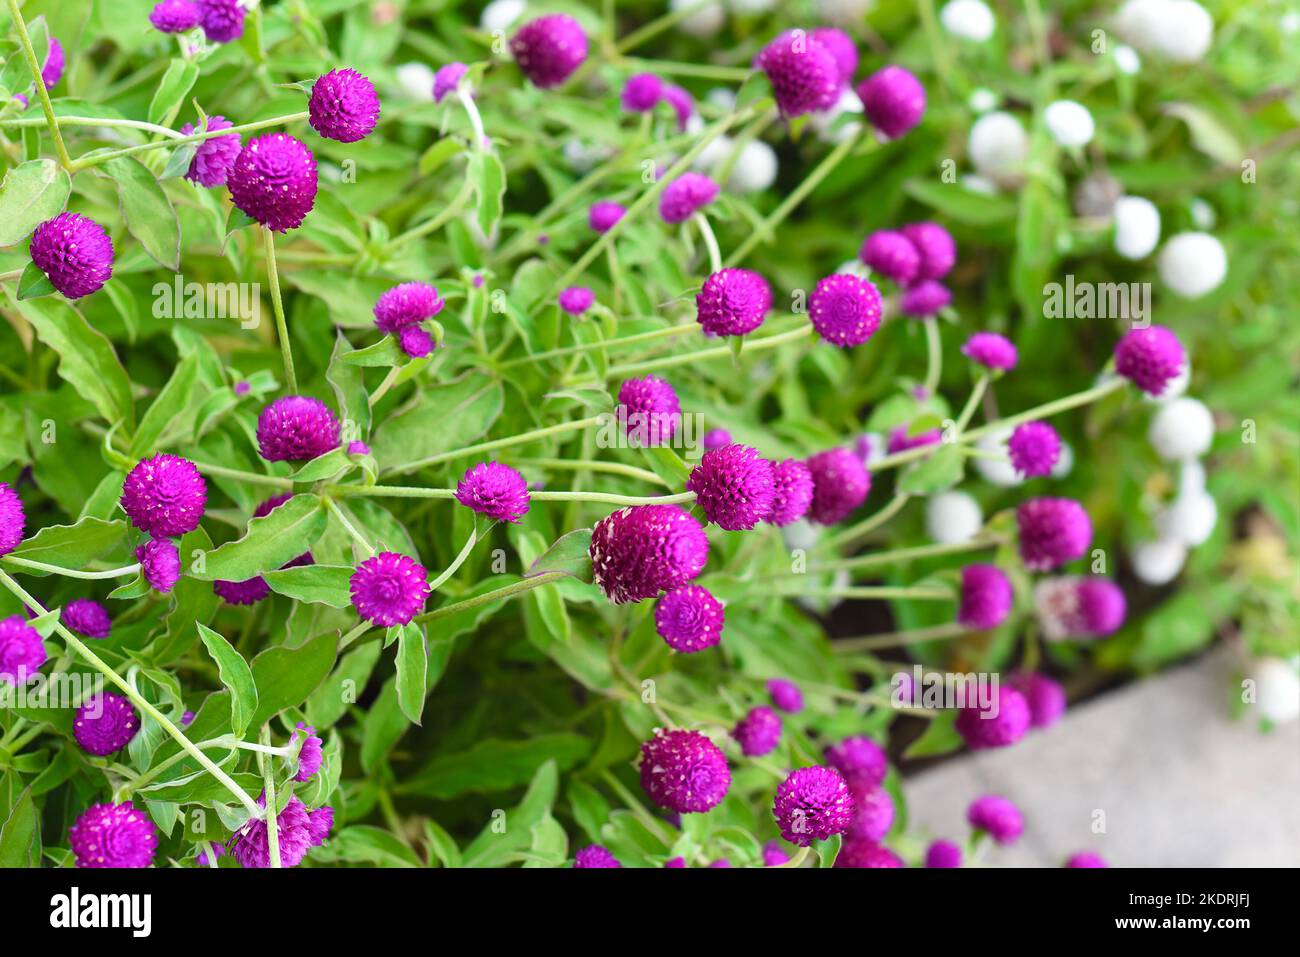 Gomphrena globosa, commonly known as globe amaranth growing in Vietnam Stock Photo